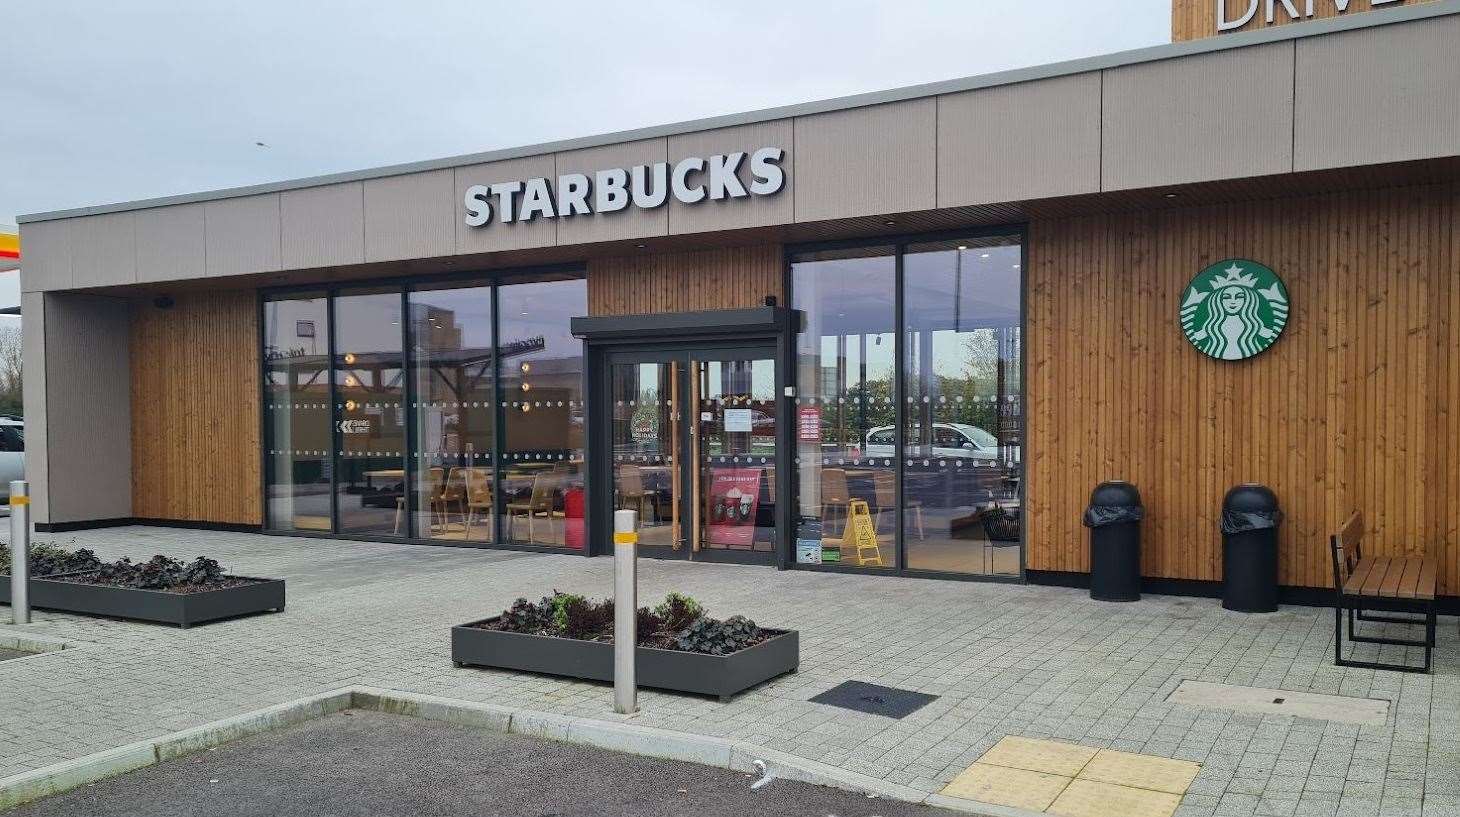 The Starbucks in Discovery Park, Sandwich, has suddenly closed